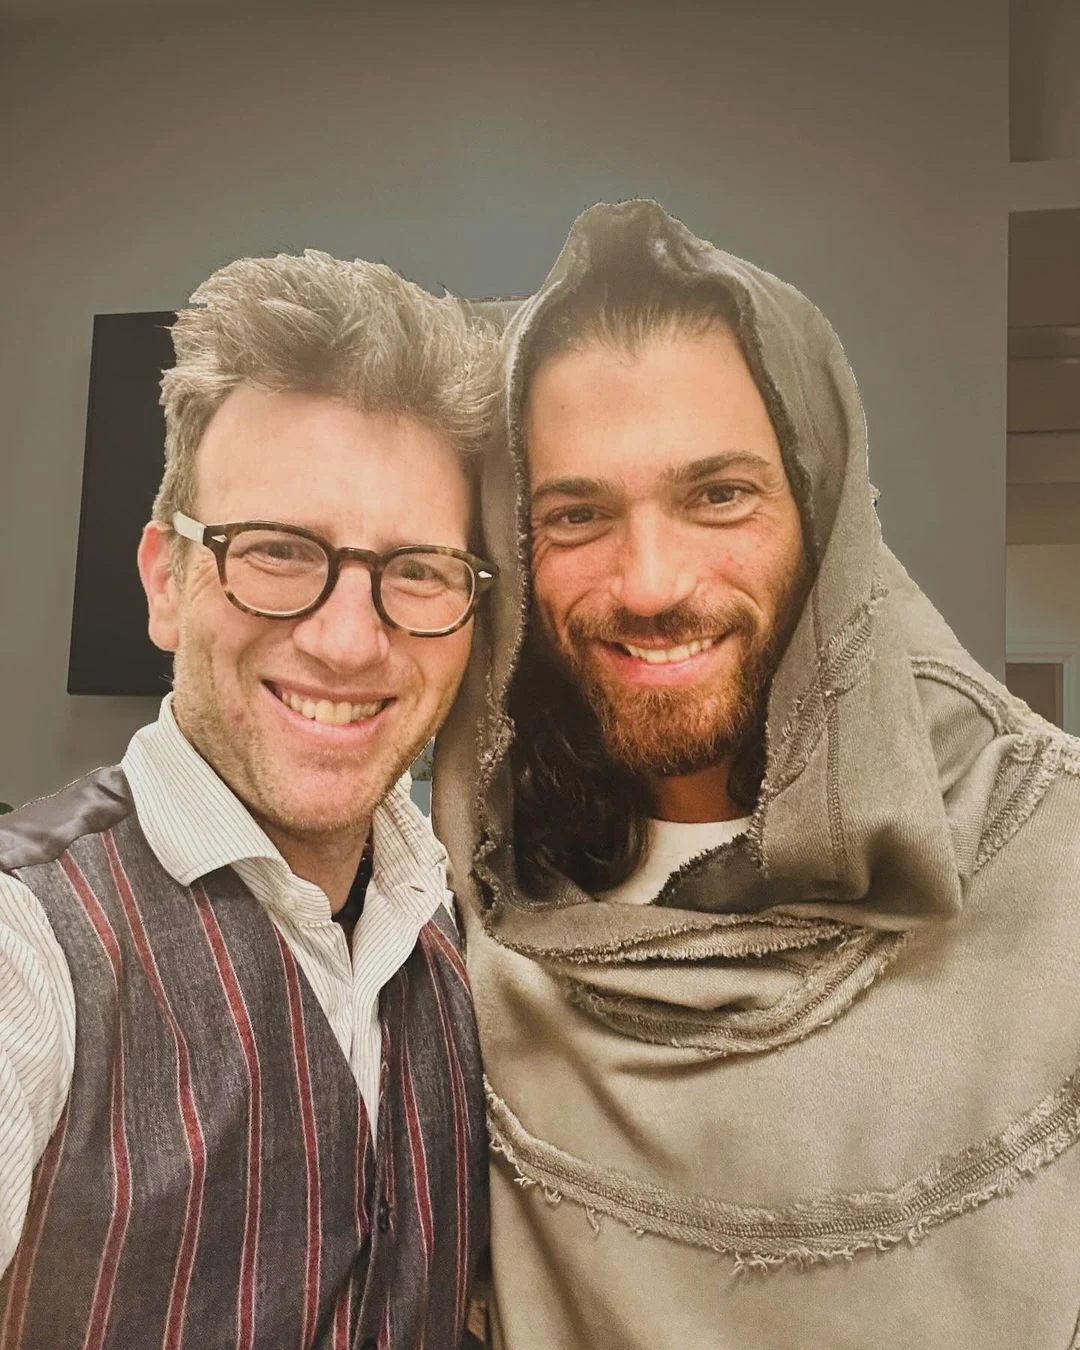 Can Yaman has updated his followers by showcasing his new physique for Sandokan. Now, the first official photo from the set has arrived.